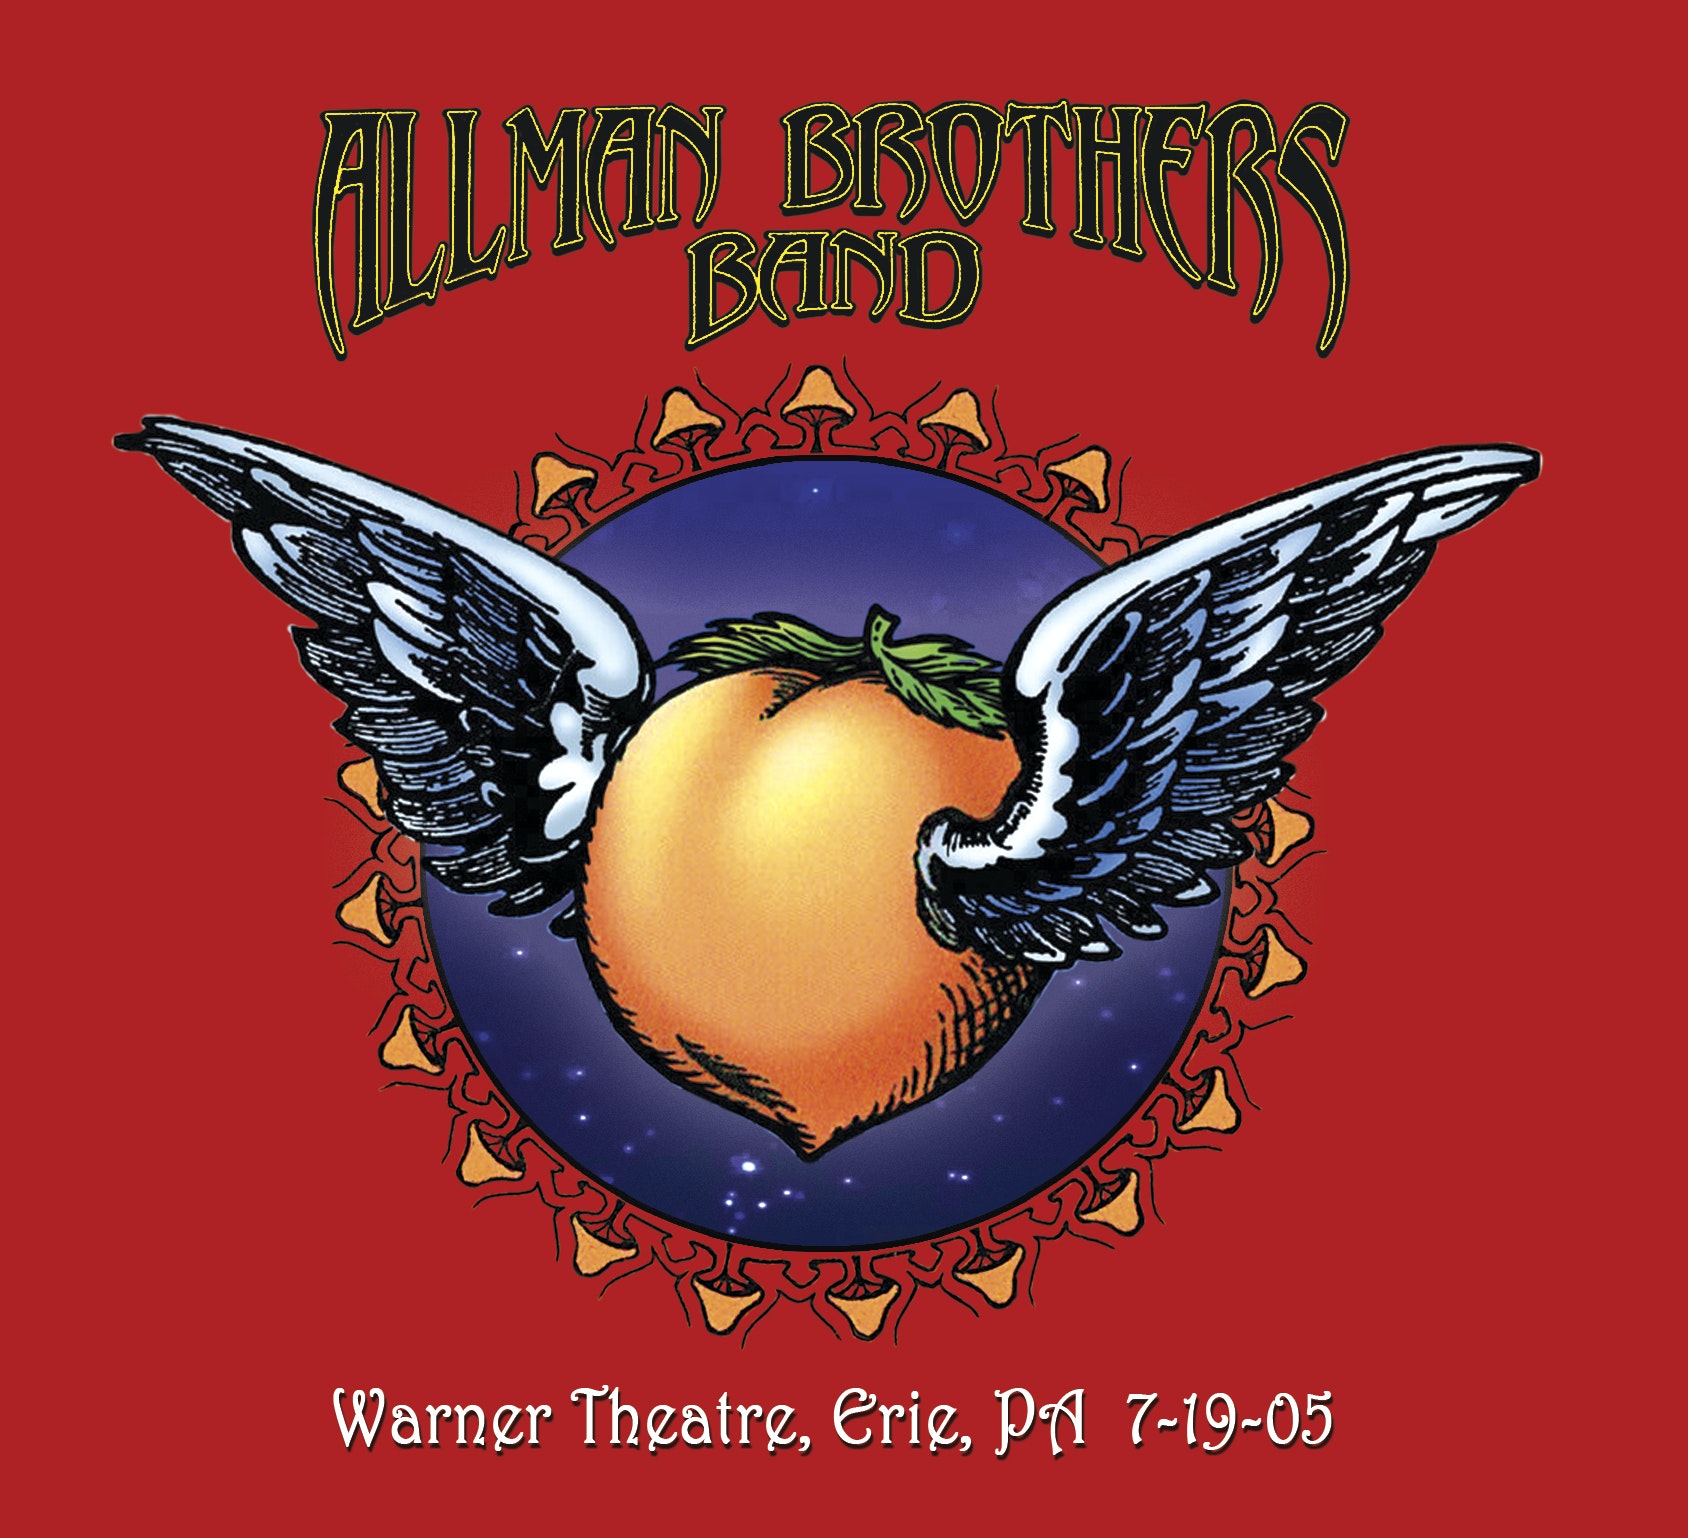 The Allman Brothers Band Prep New Archival Releases: Duane Allman’s Final Show and Band-Favorite 2005 Gig